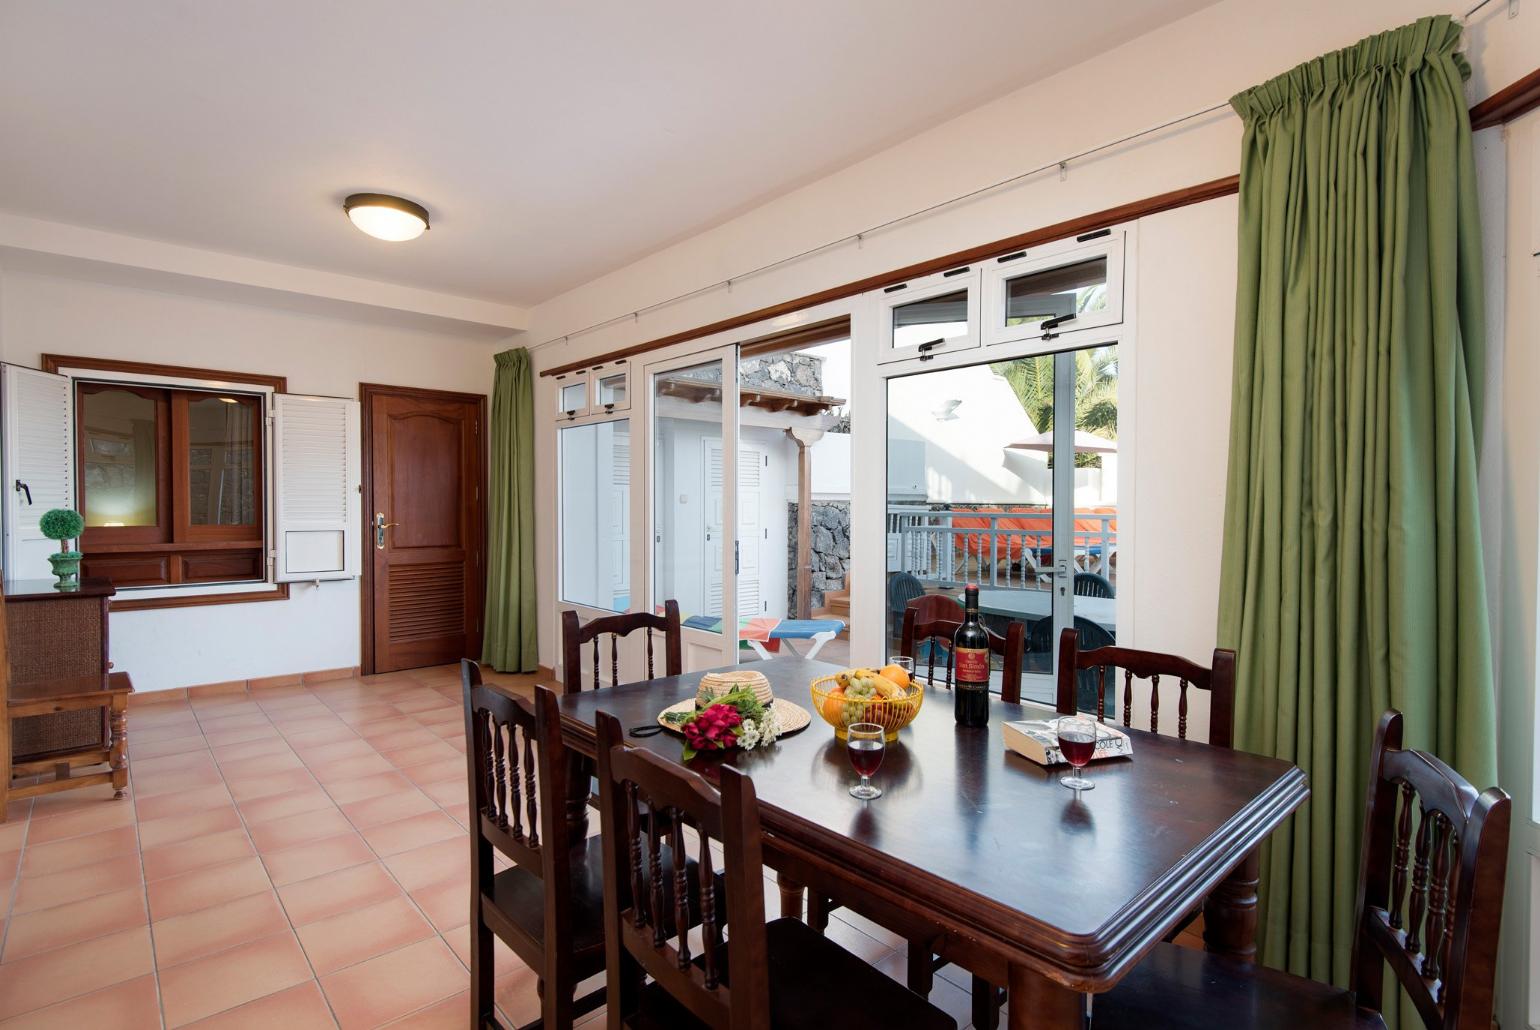 Dining area with terrace access